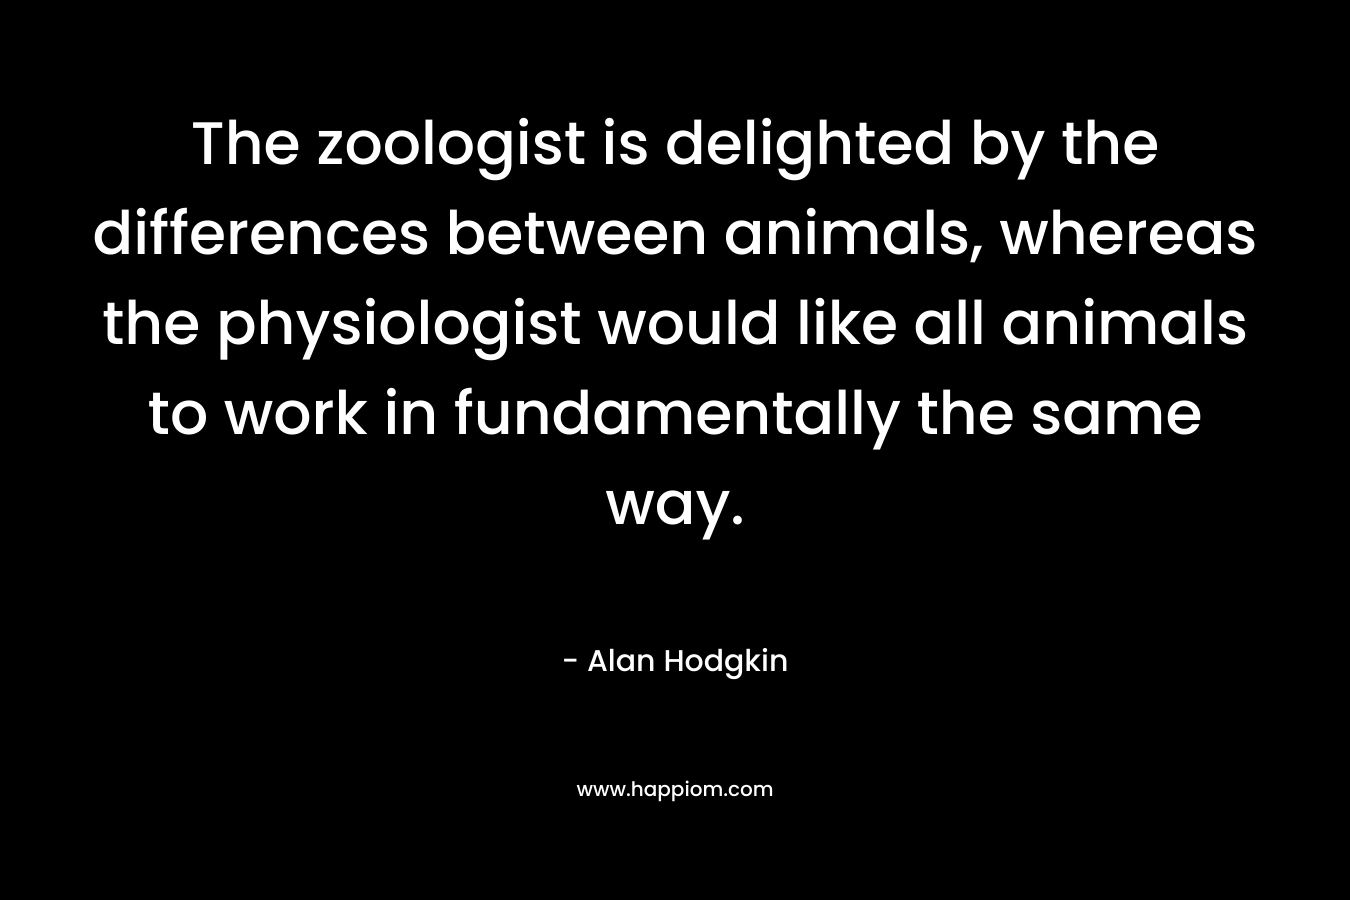 The zoologist is delighted by the differences between animals, whereas the physiologist would like all animals to work in fundamentally the same way. – Alan Hodgkin